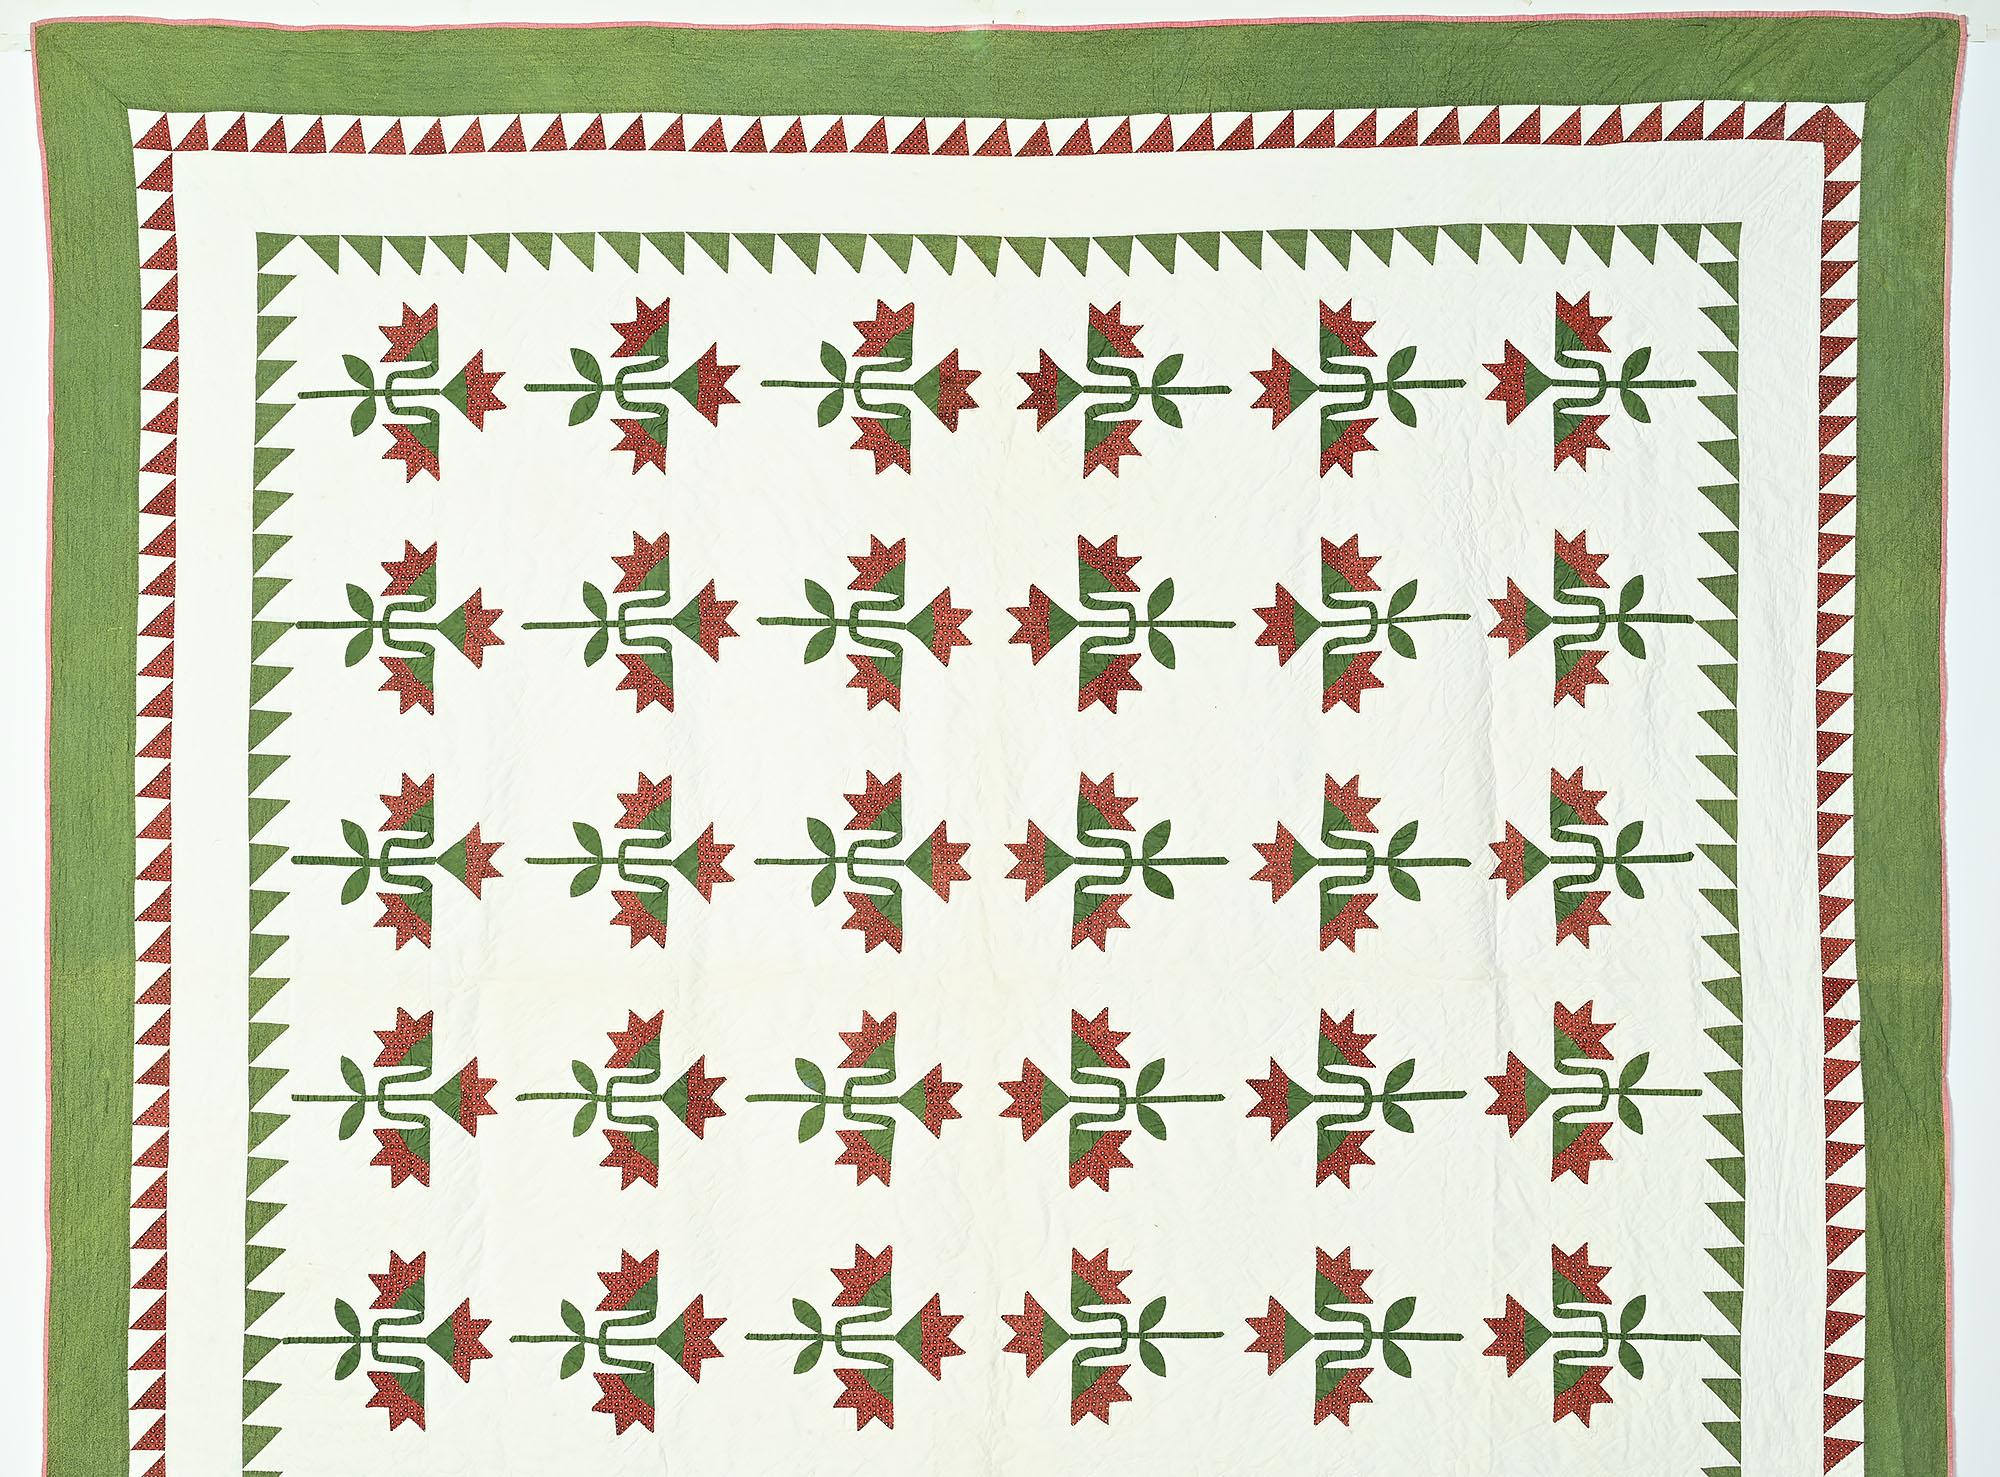 A well crafted version of the traditional Carolina Lily pattern. It is delicately pieced and appliqued with especially fine stems and leaves. It has a thin batting so although the quilting in the white blocks is very well done, it is not